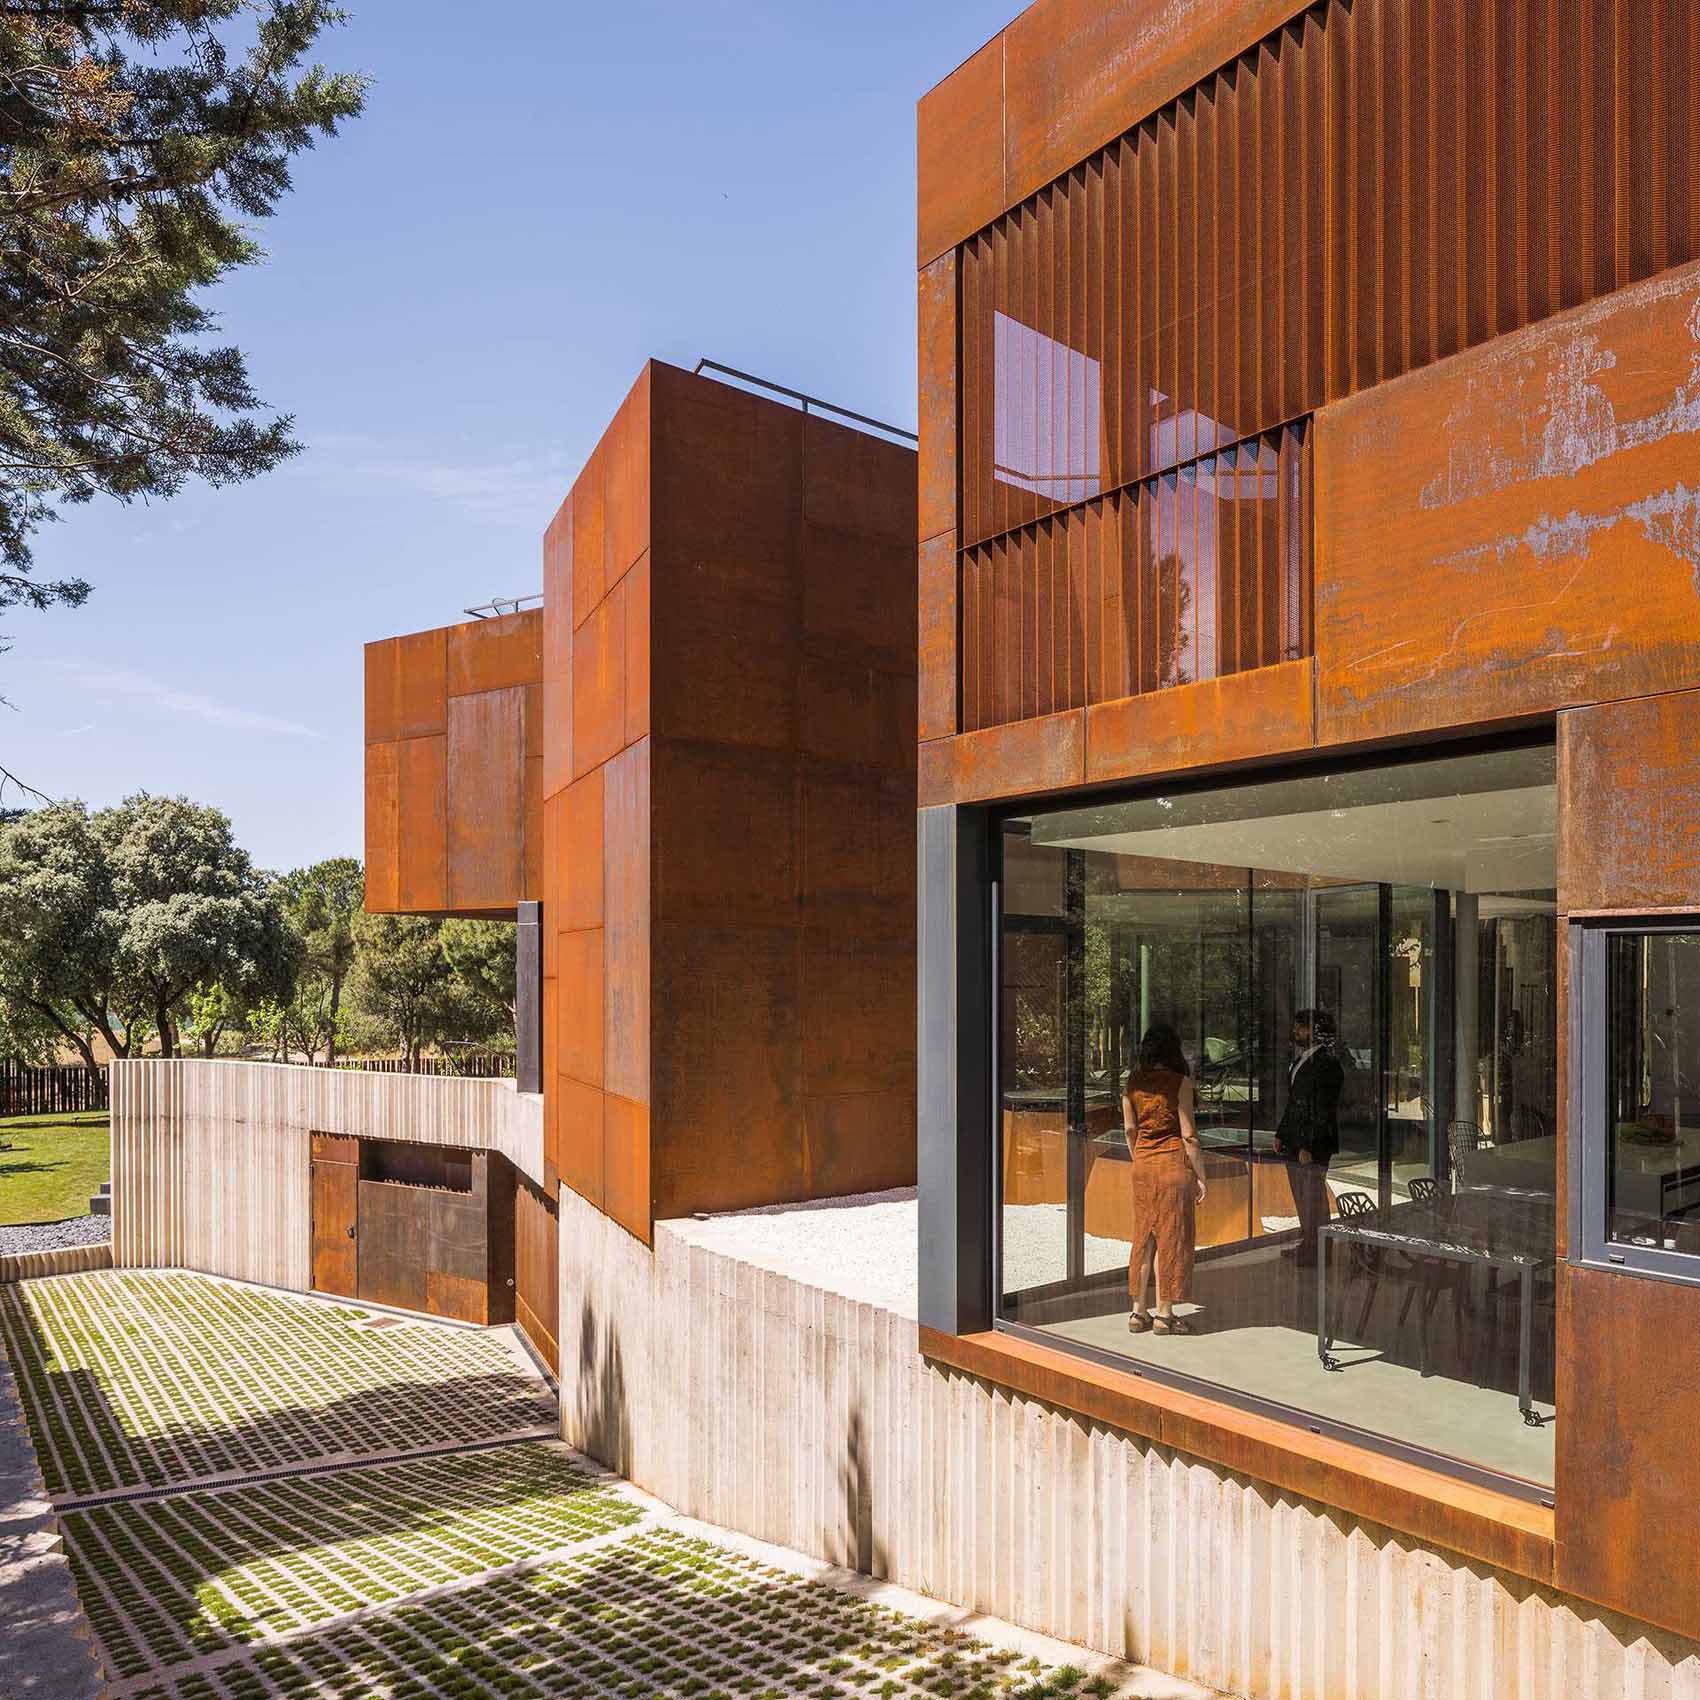 A modern house features large windows, cantilevered elements, and a weathered steel facade.